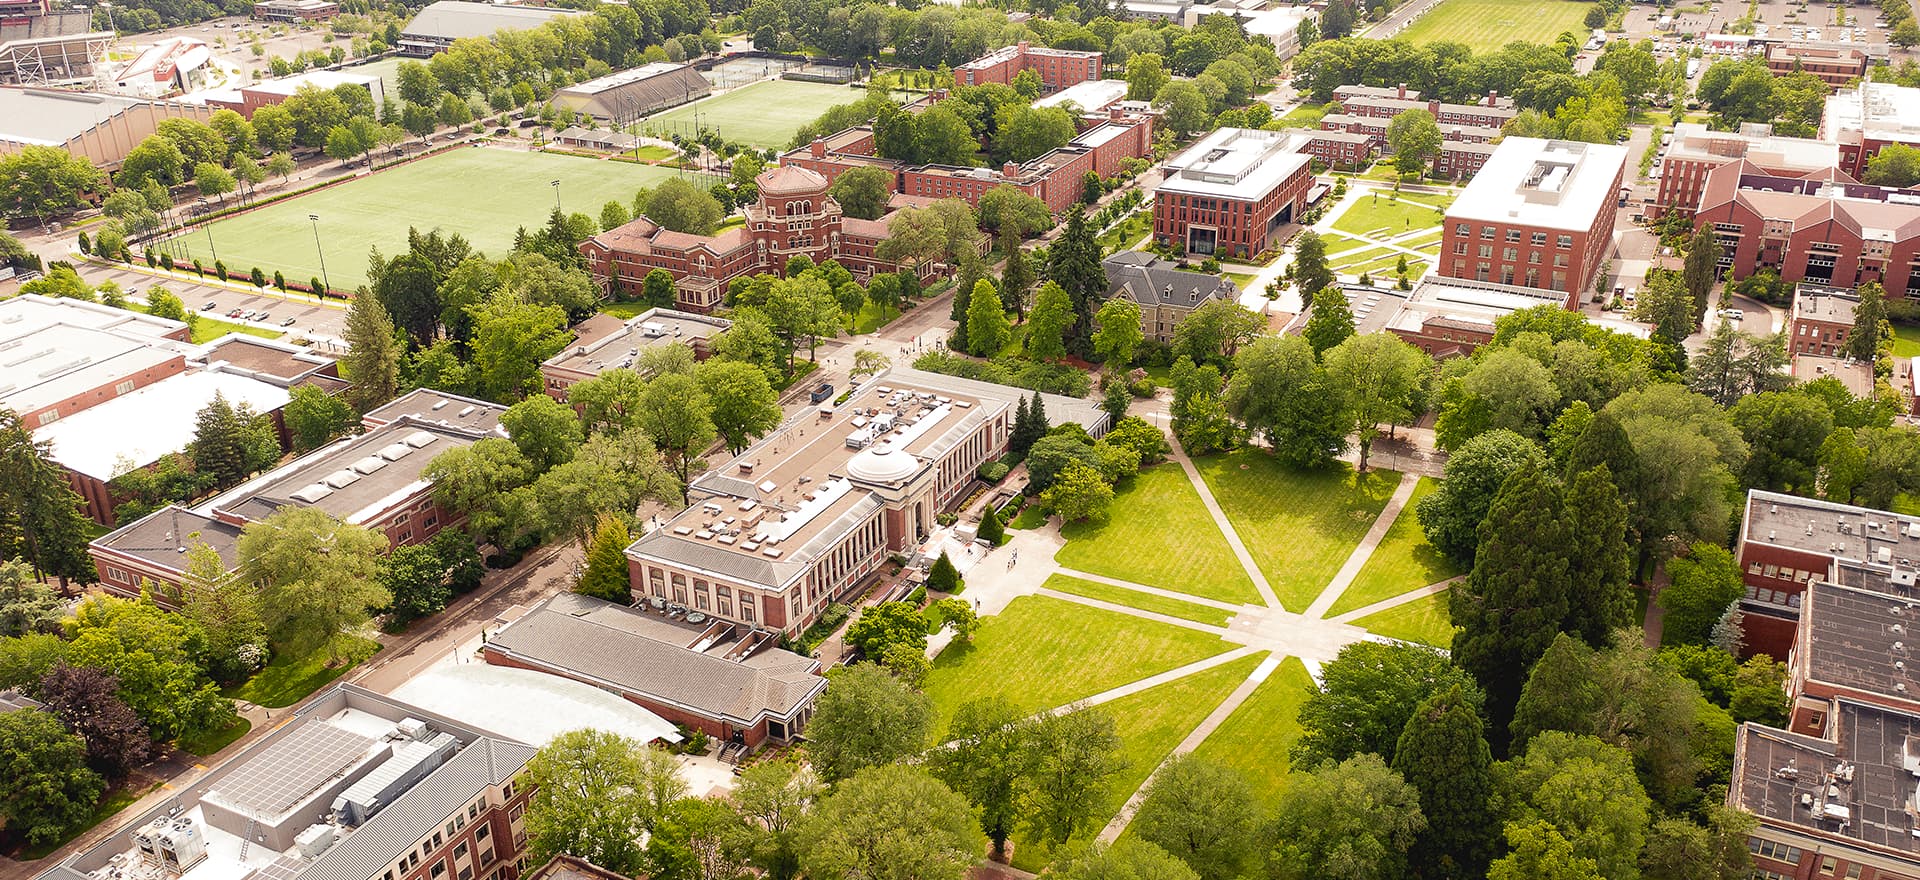 Aerial image showing the MU, quad, Weatherford and IM fields. Lots of greenery and trees as well.